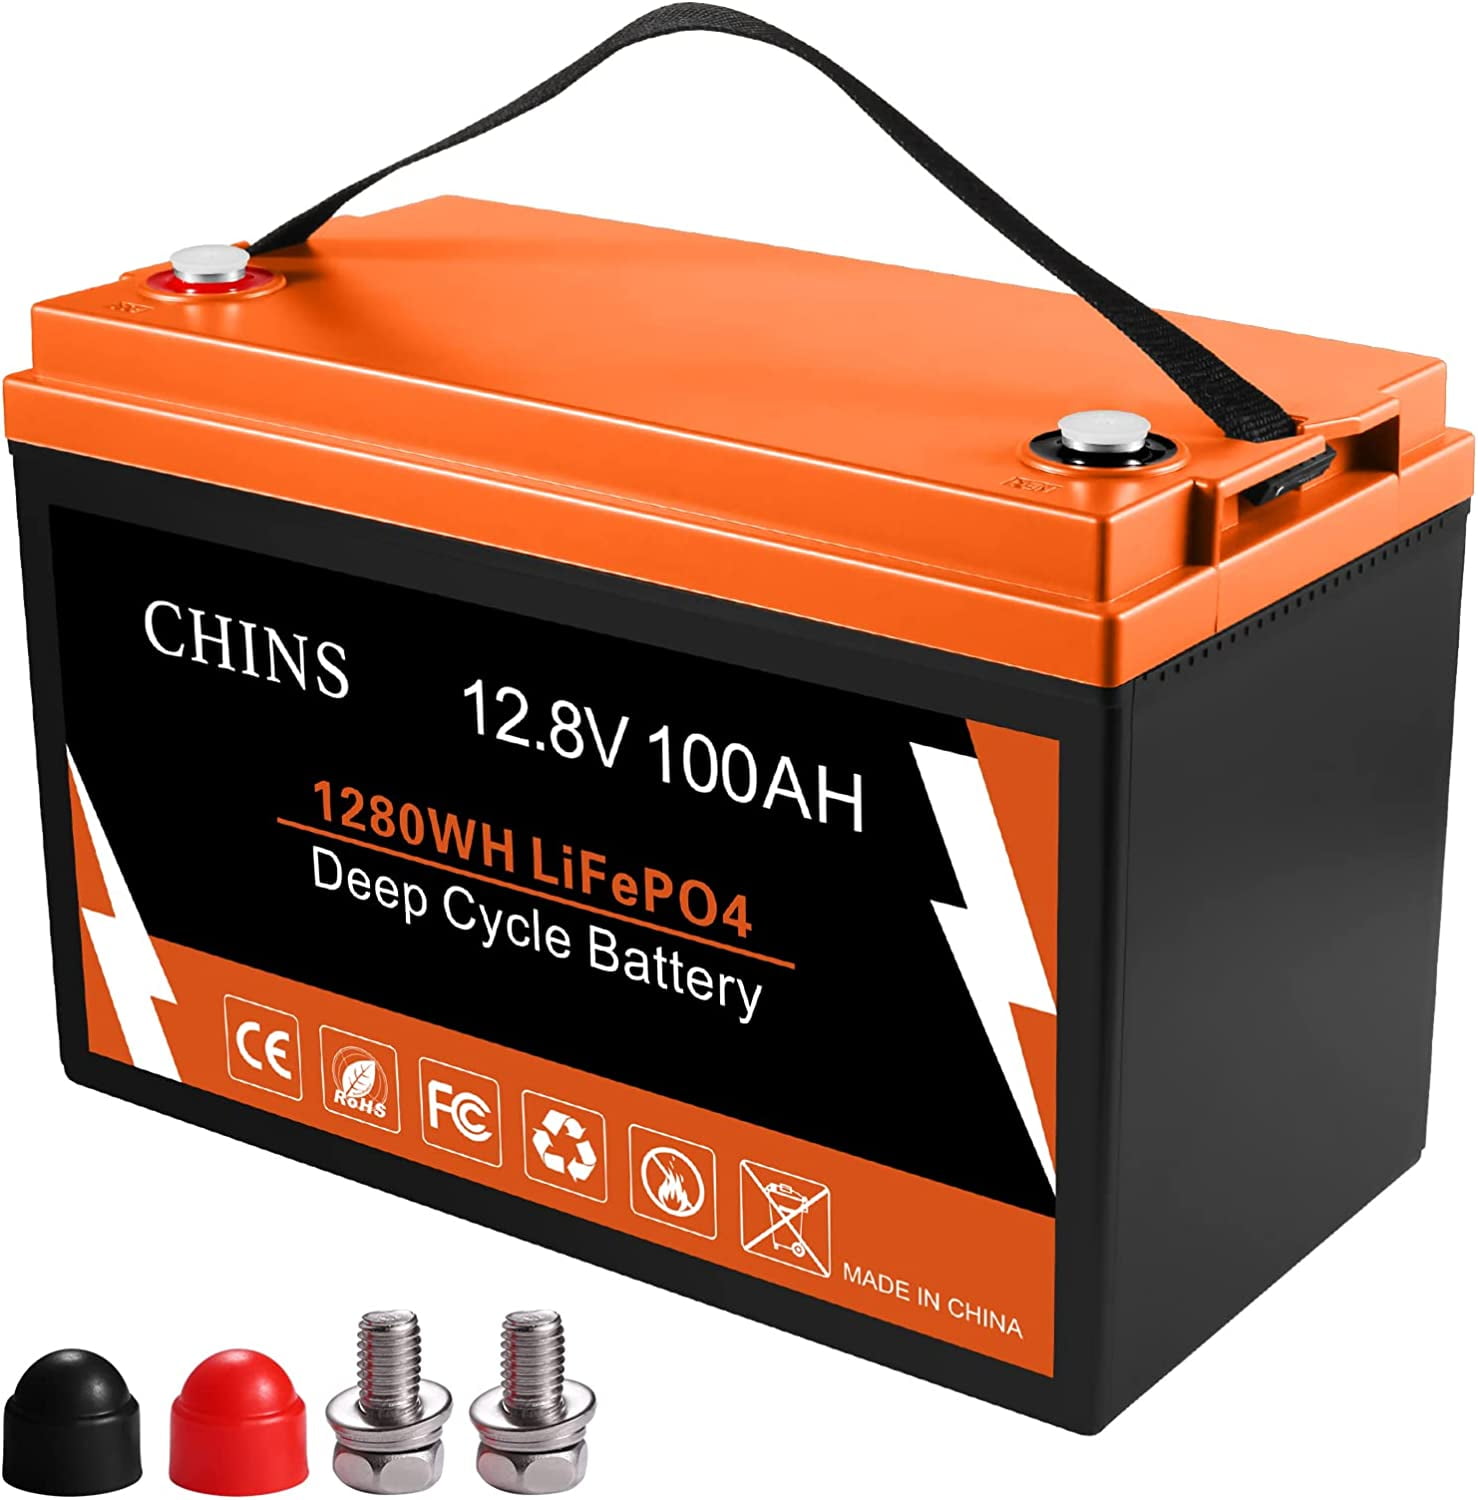 CHINS Smart LiFePO4 Lithium Iron Battery 12.8V 100Ah for Boat Fishing 